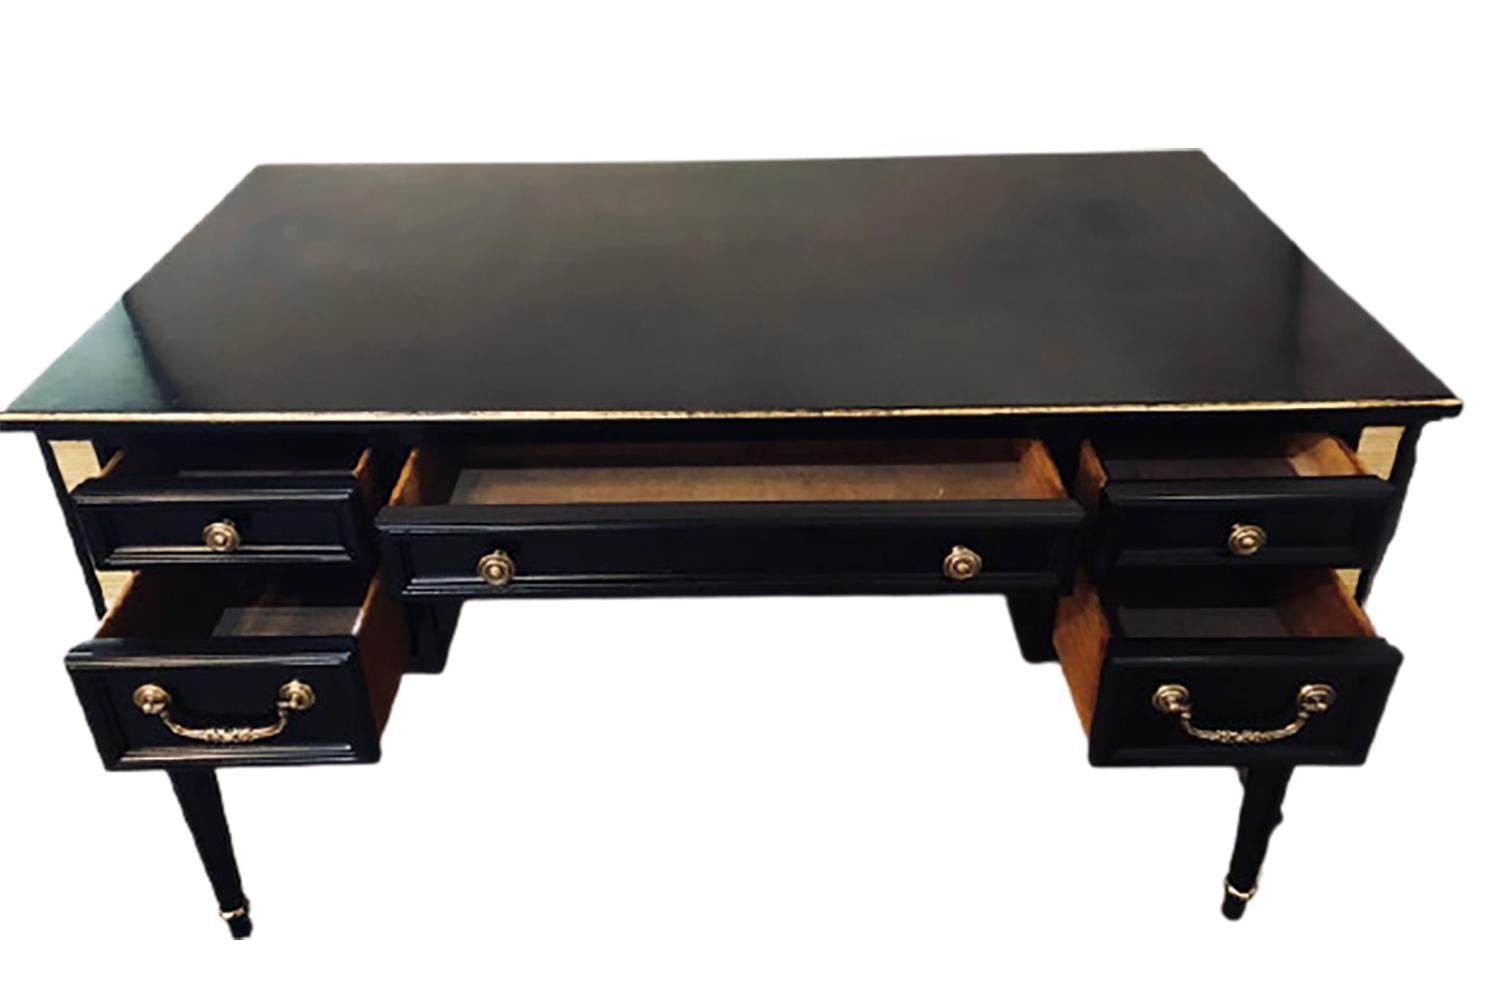 A Louis XVI style bronze-mounted ebony writing desk. This finely constructed writing desk has a large surface easily able to fit a working station and computer system. The center drawer flanked by a pair of side drawers with a large knee hole fitted